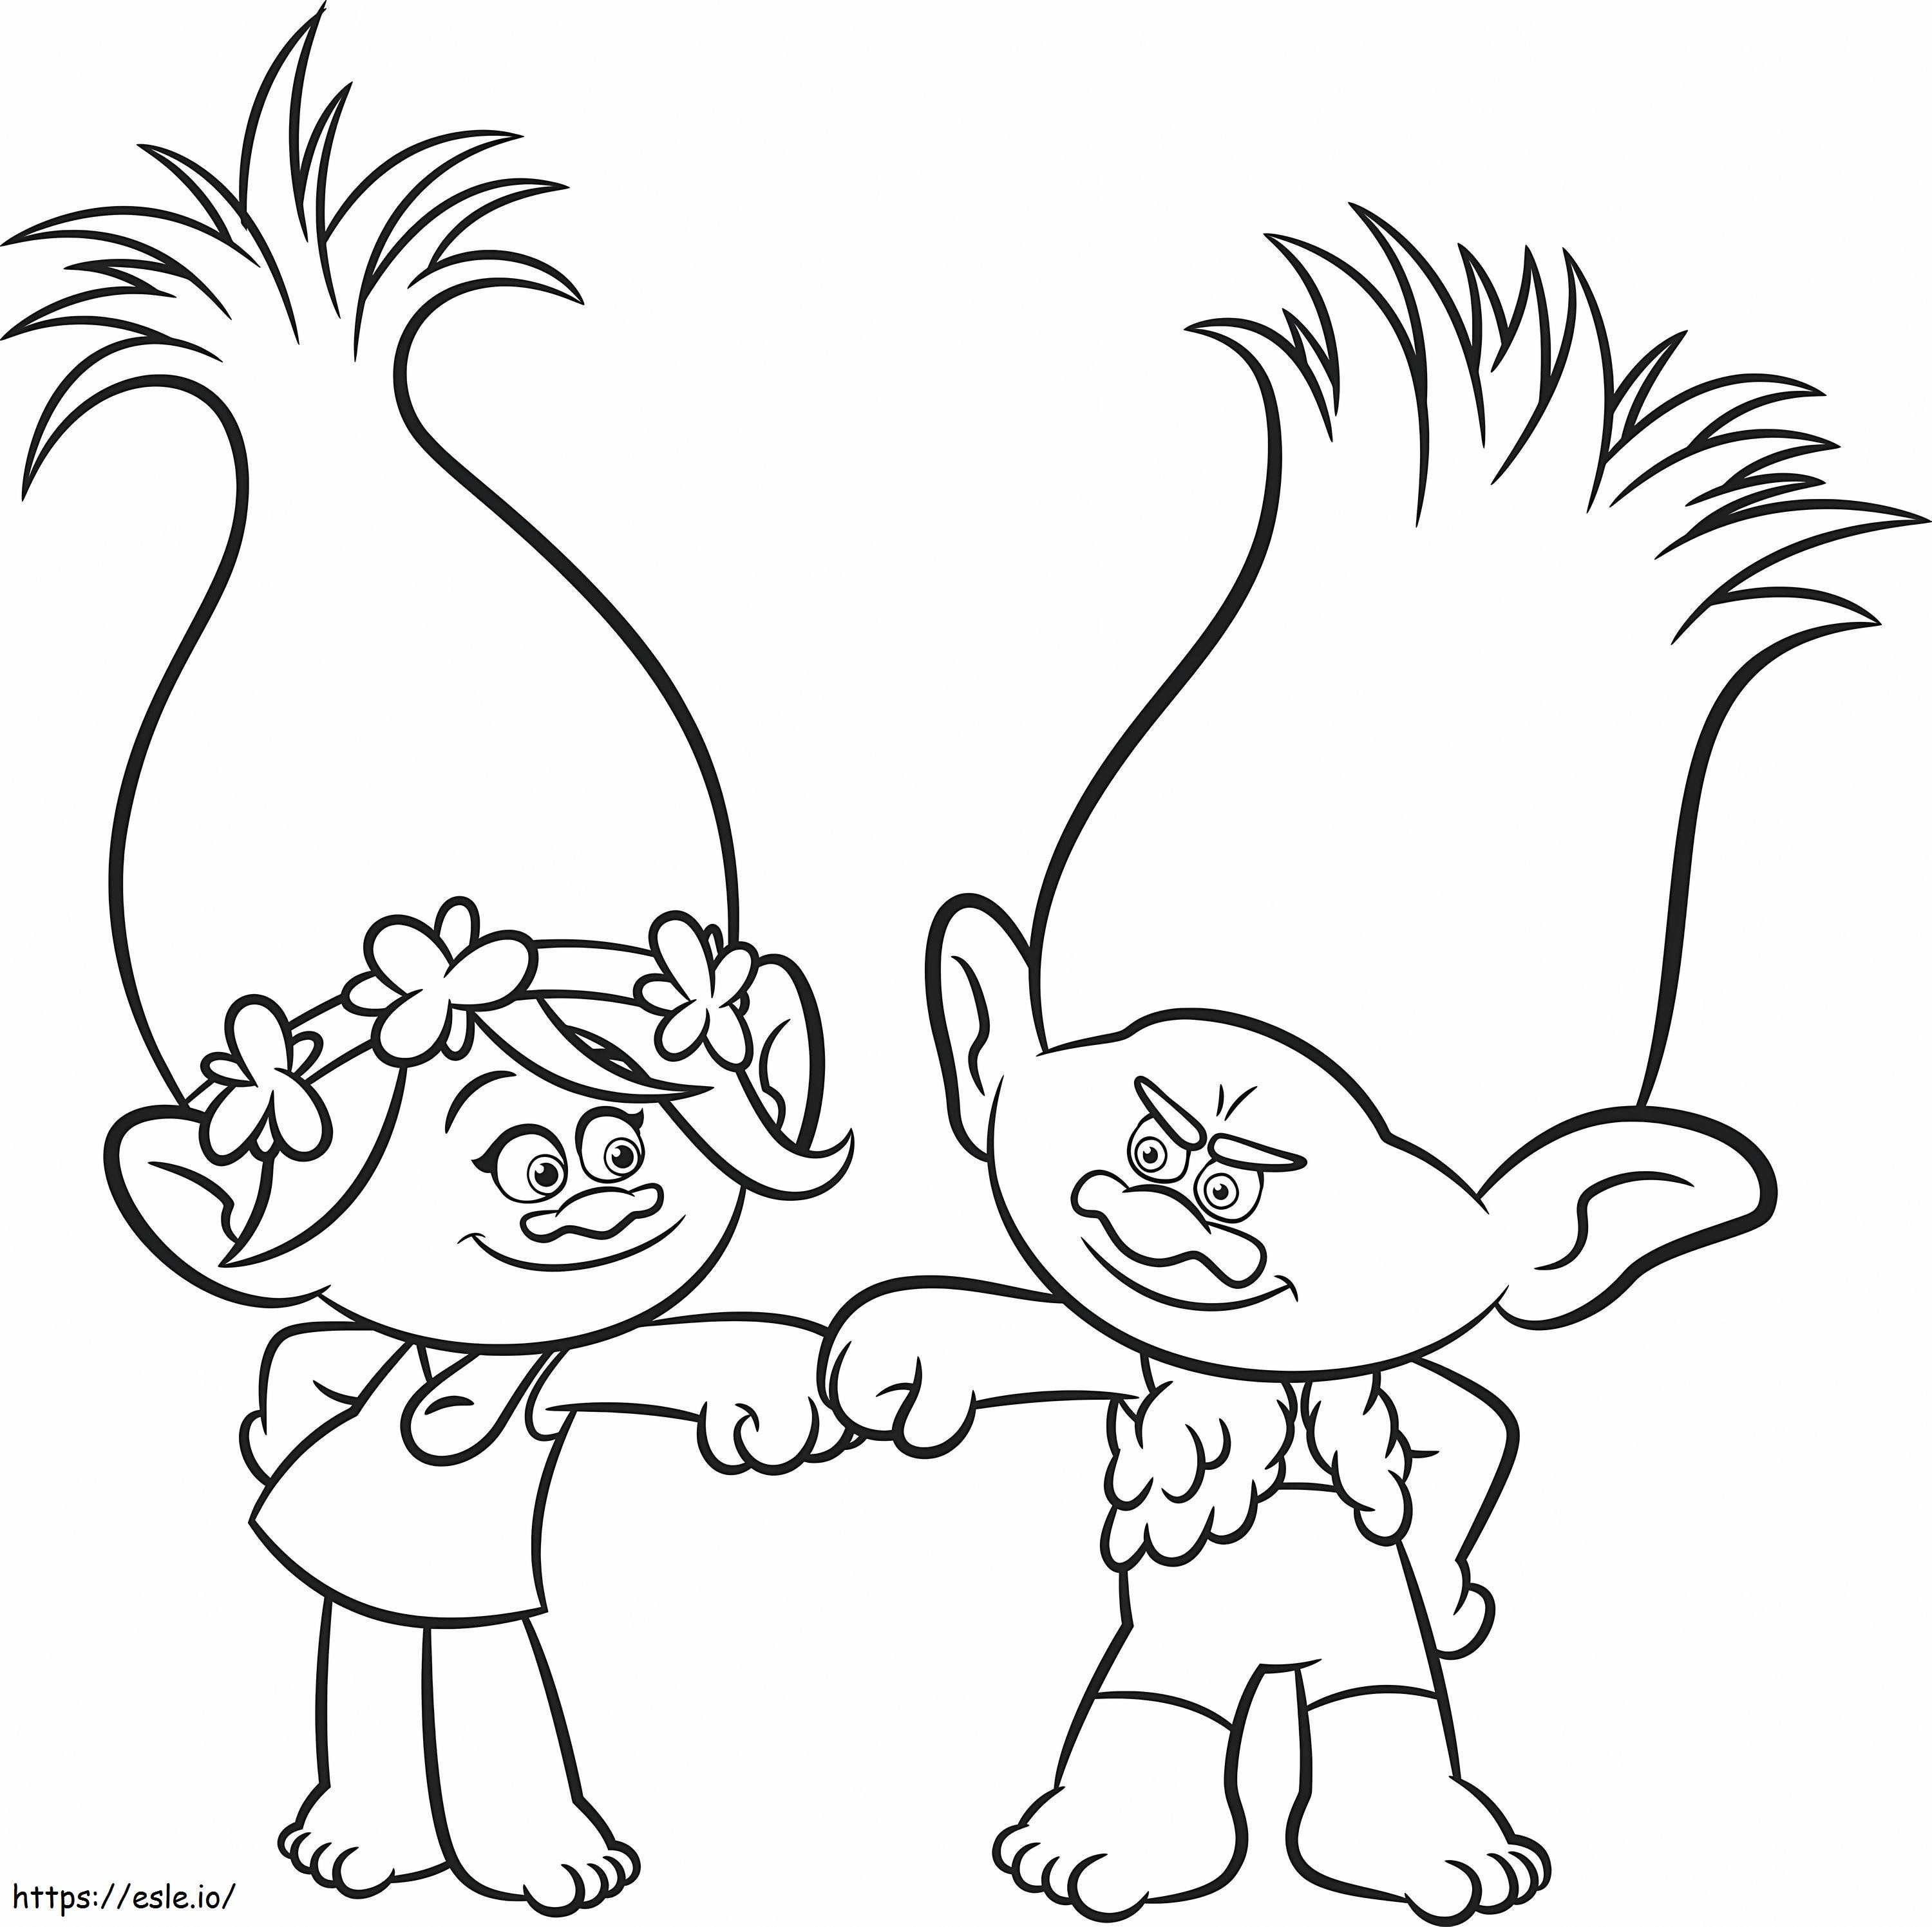 1531795039 Poppy And Branch Smiling A4 coloring page